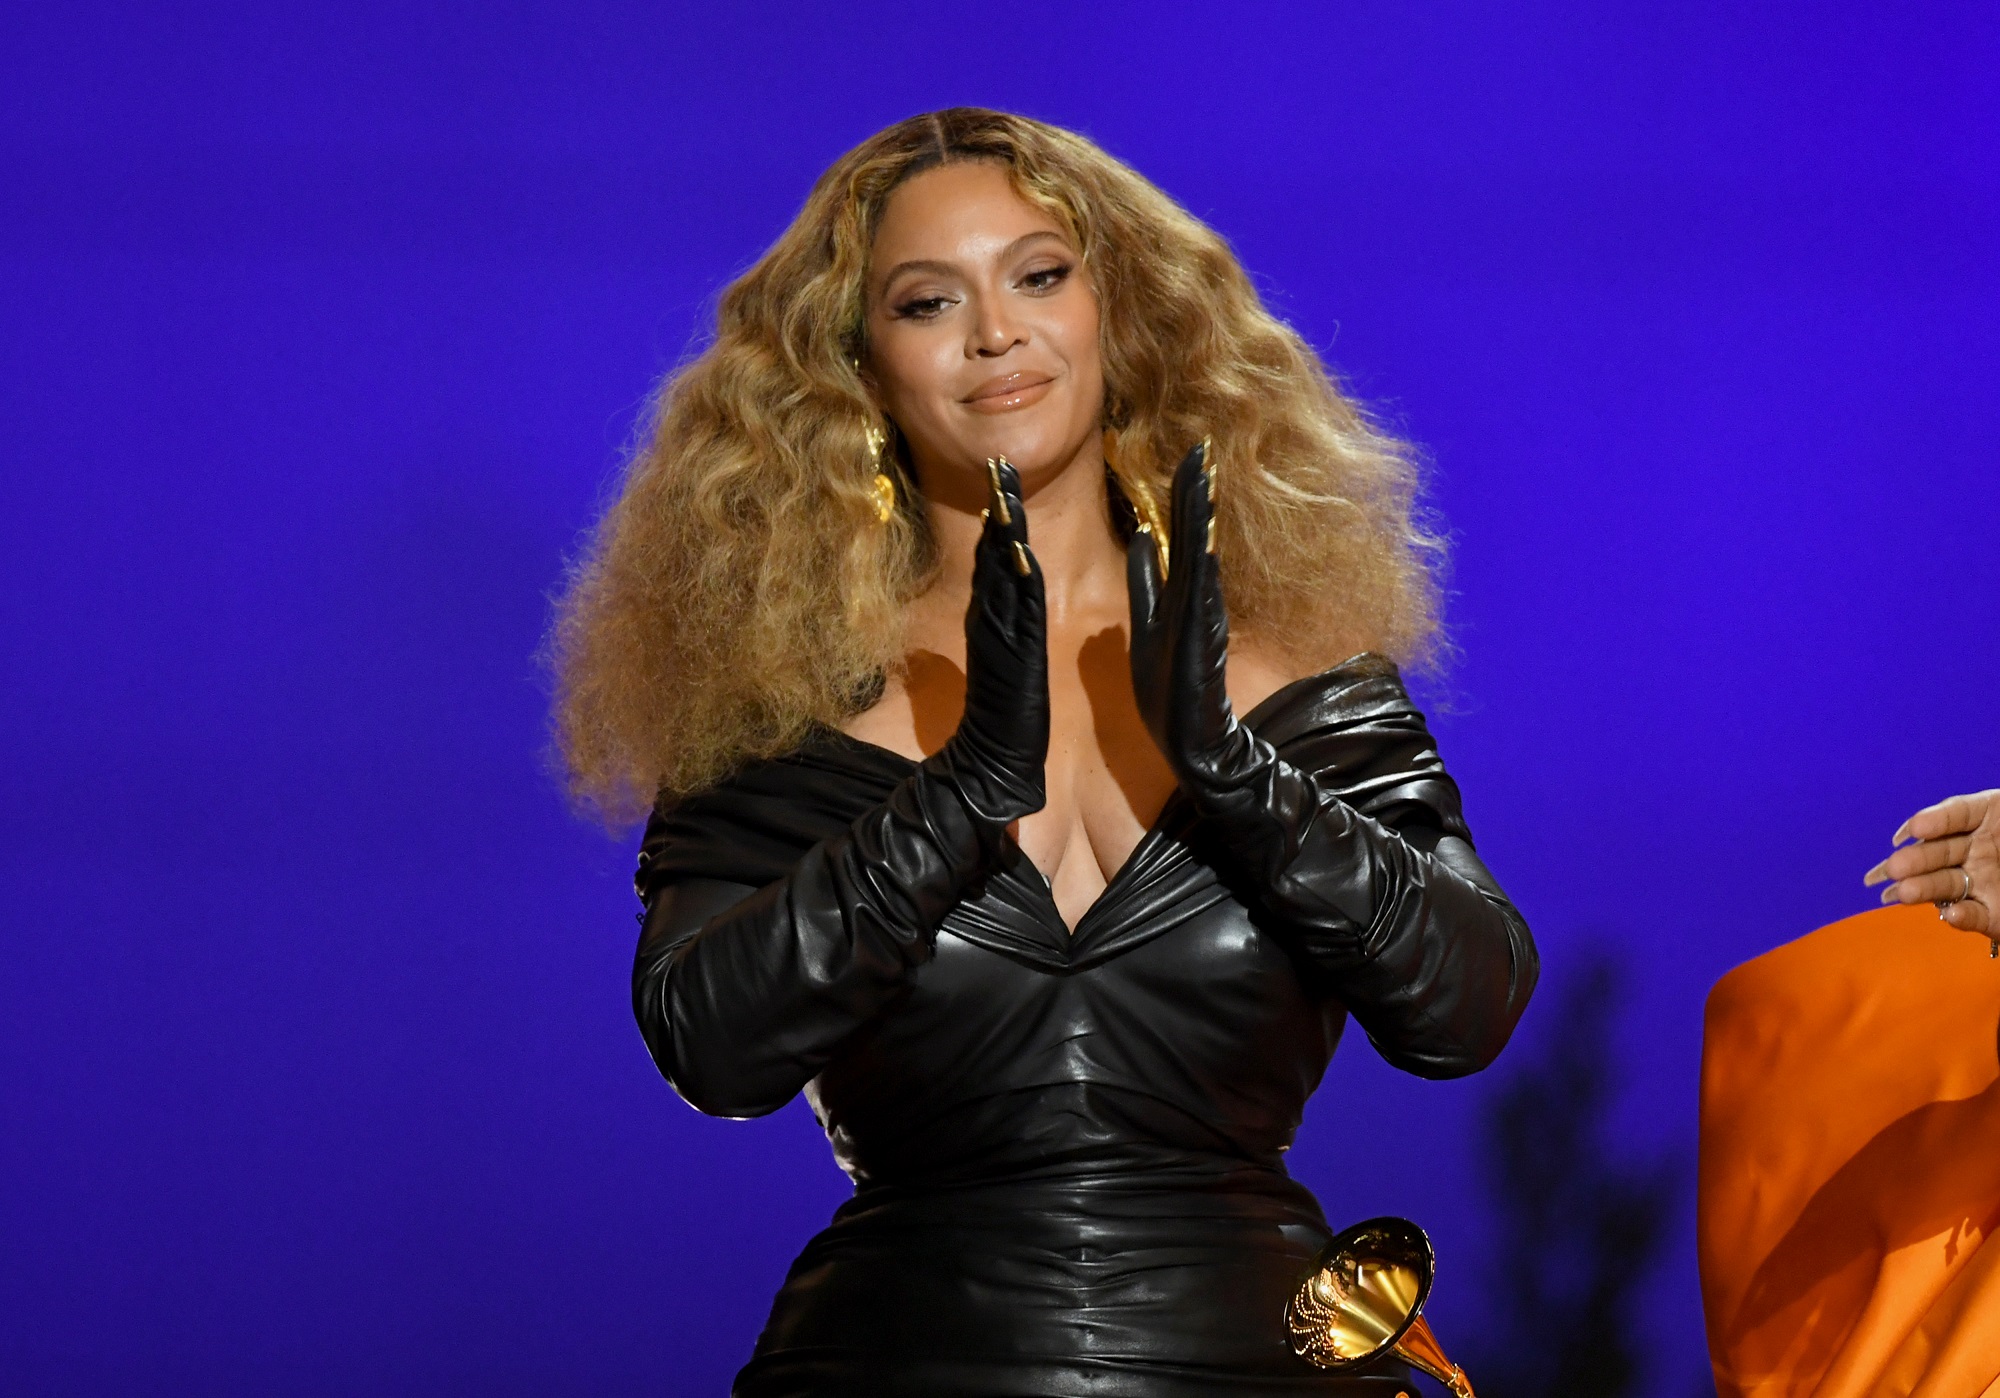 Beyoncé begins to clap while wearing a black leather dress